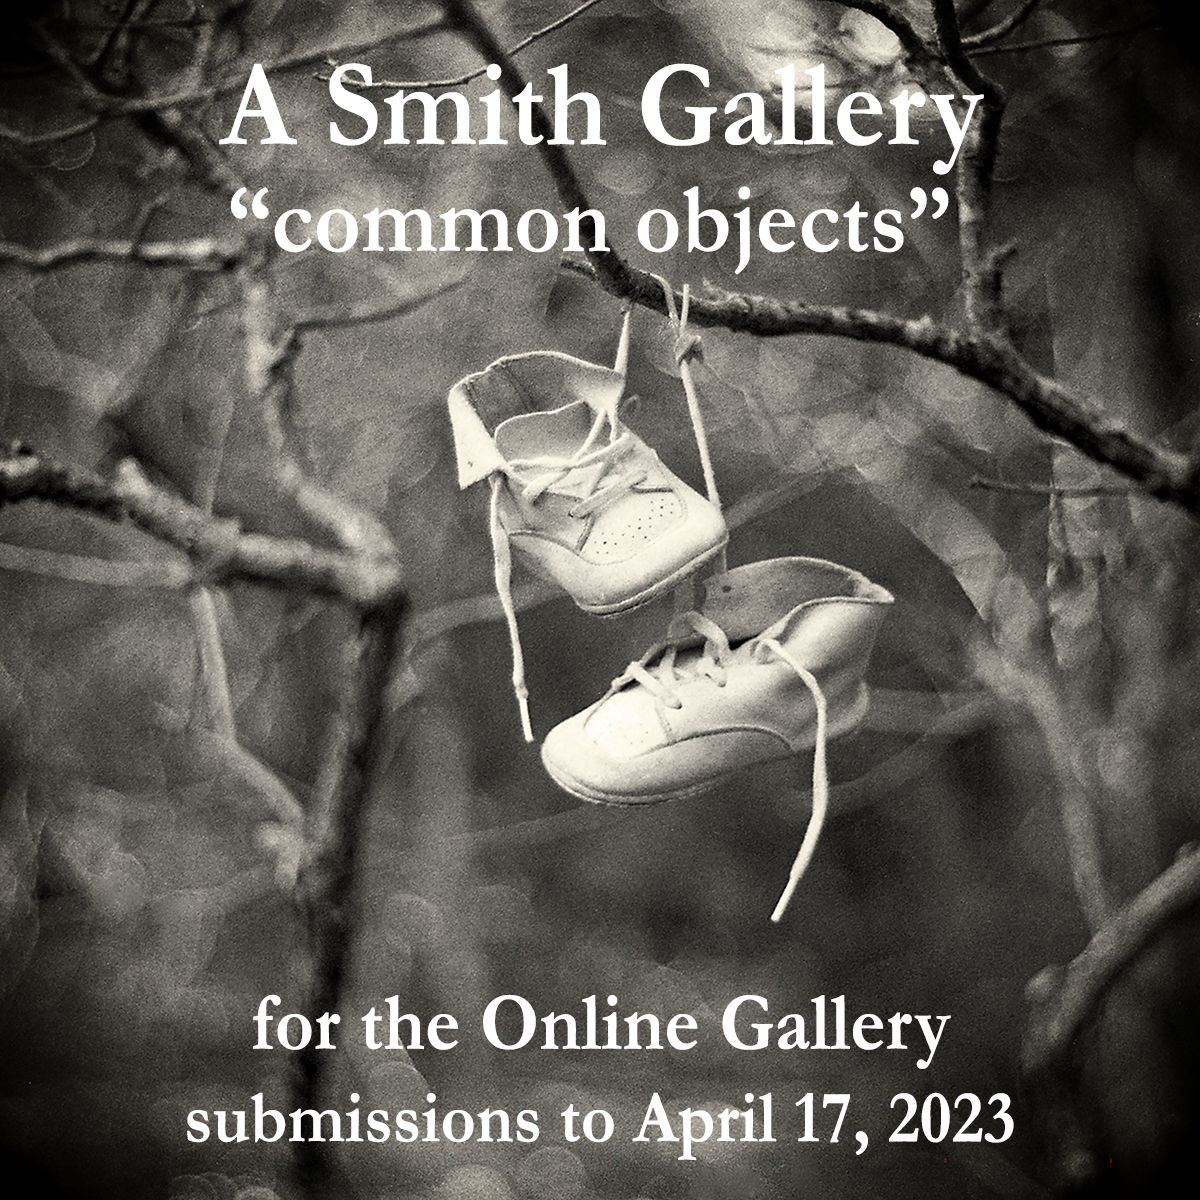 A Smith Gallery’s “common objects” - logo